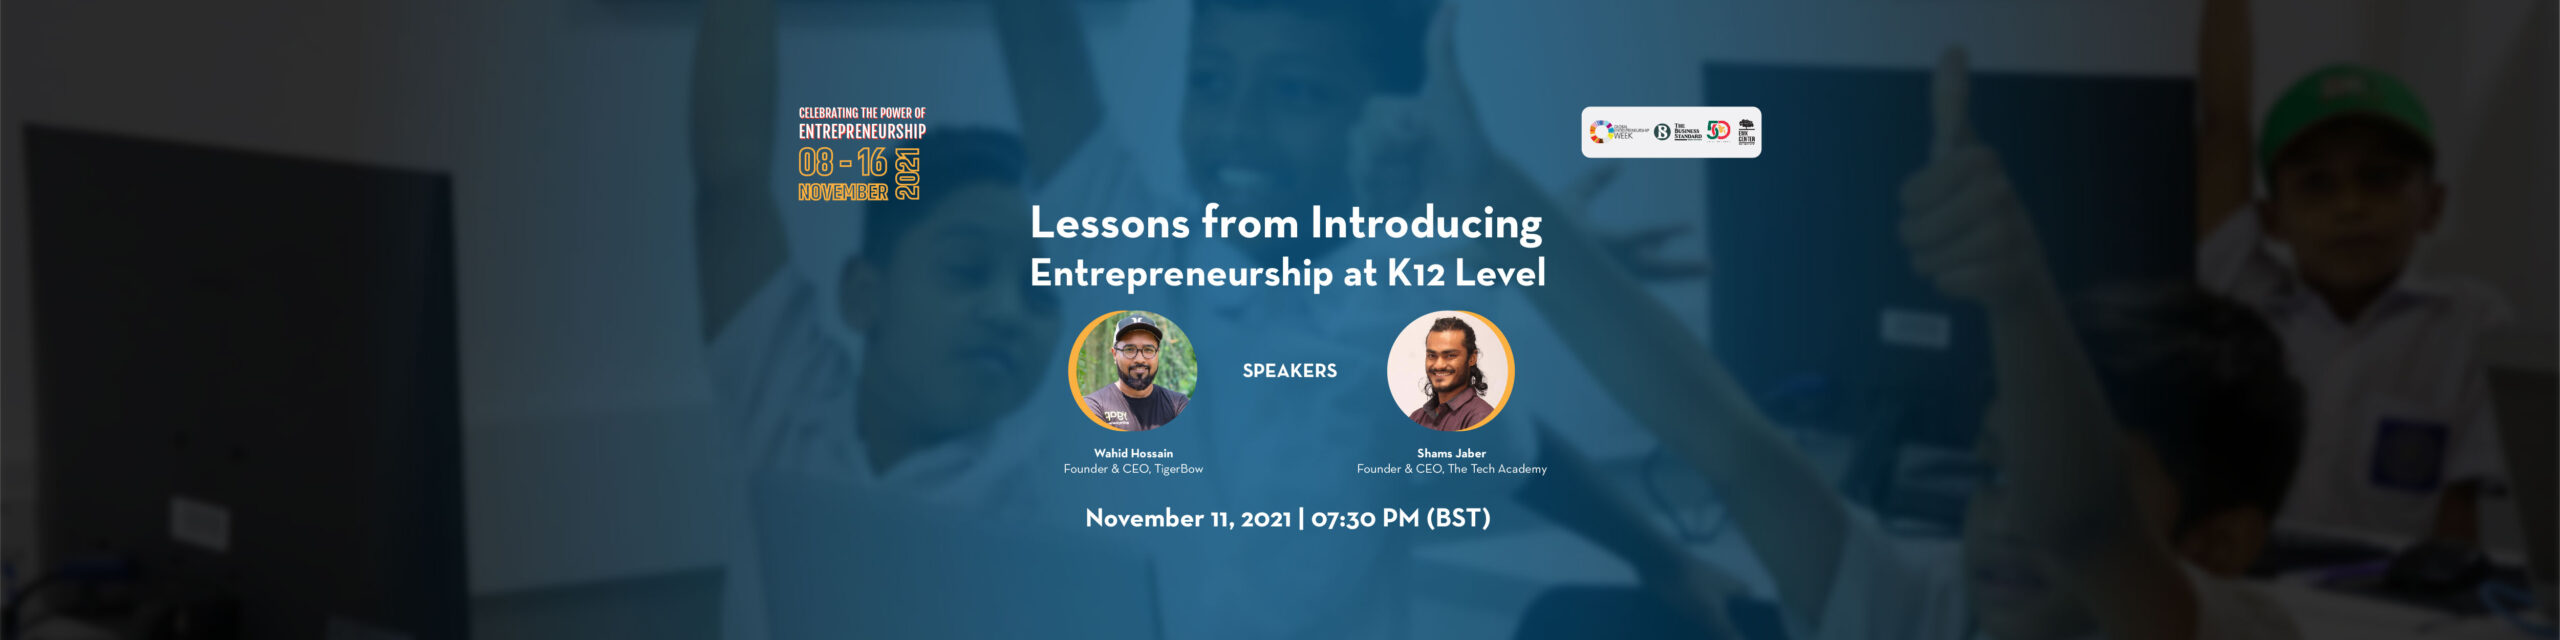 Lessons from introducing entrepreneurship at K12 level